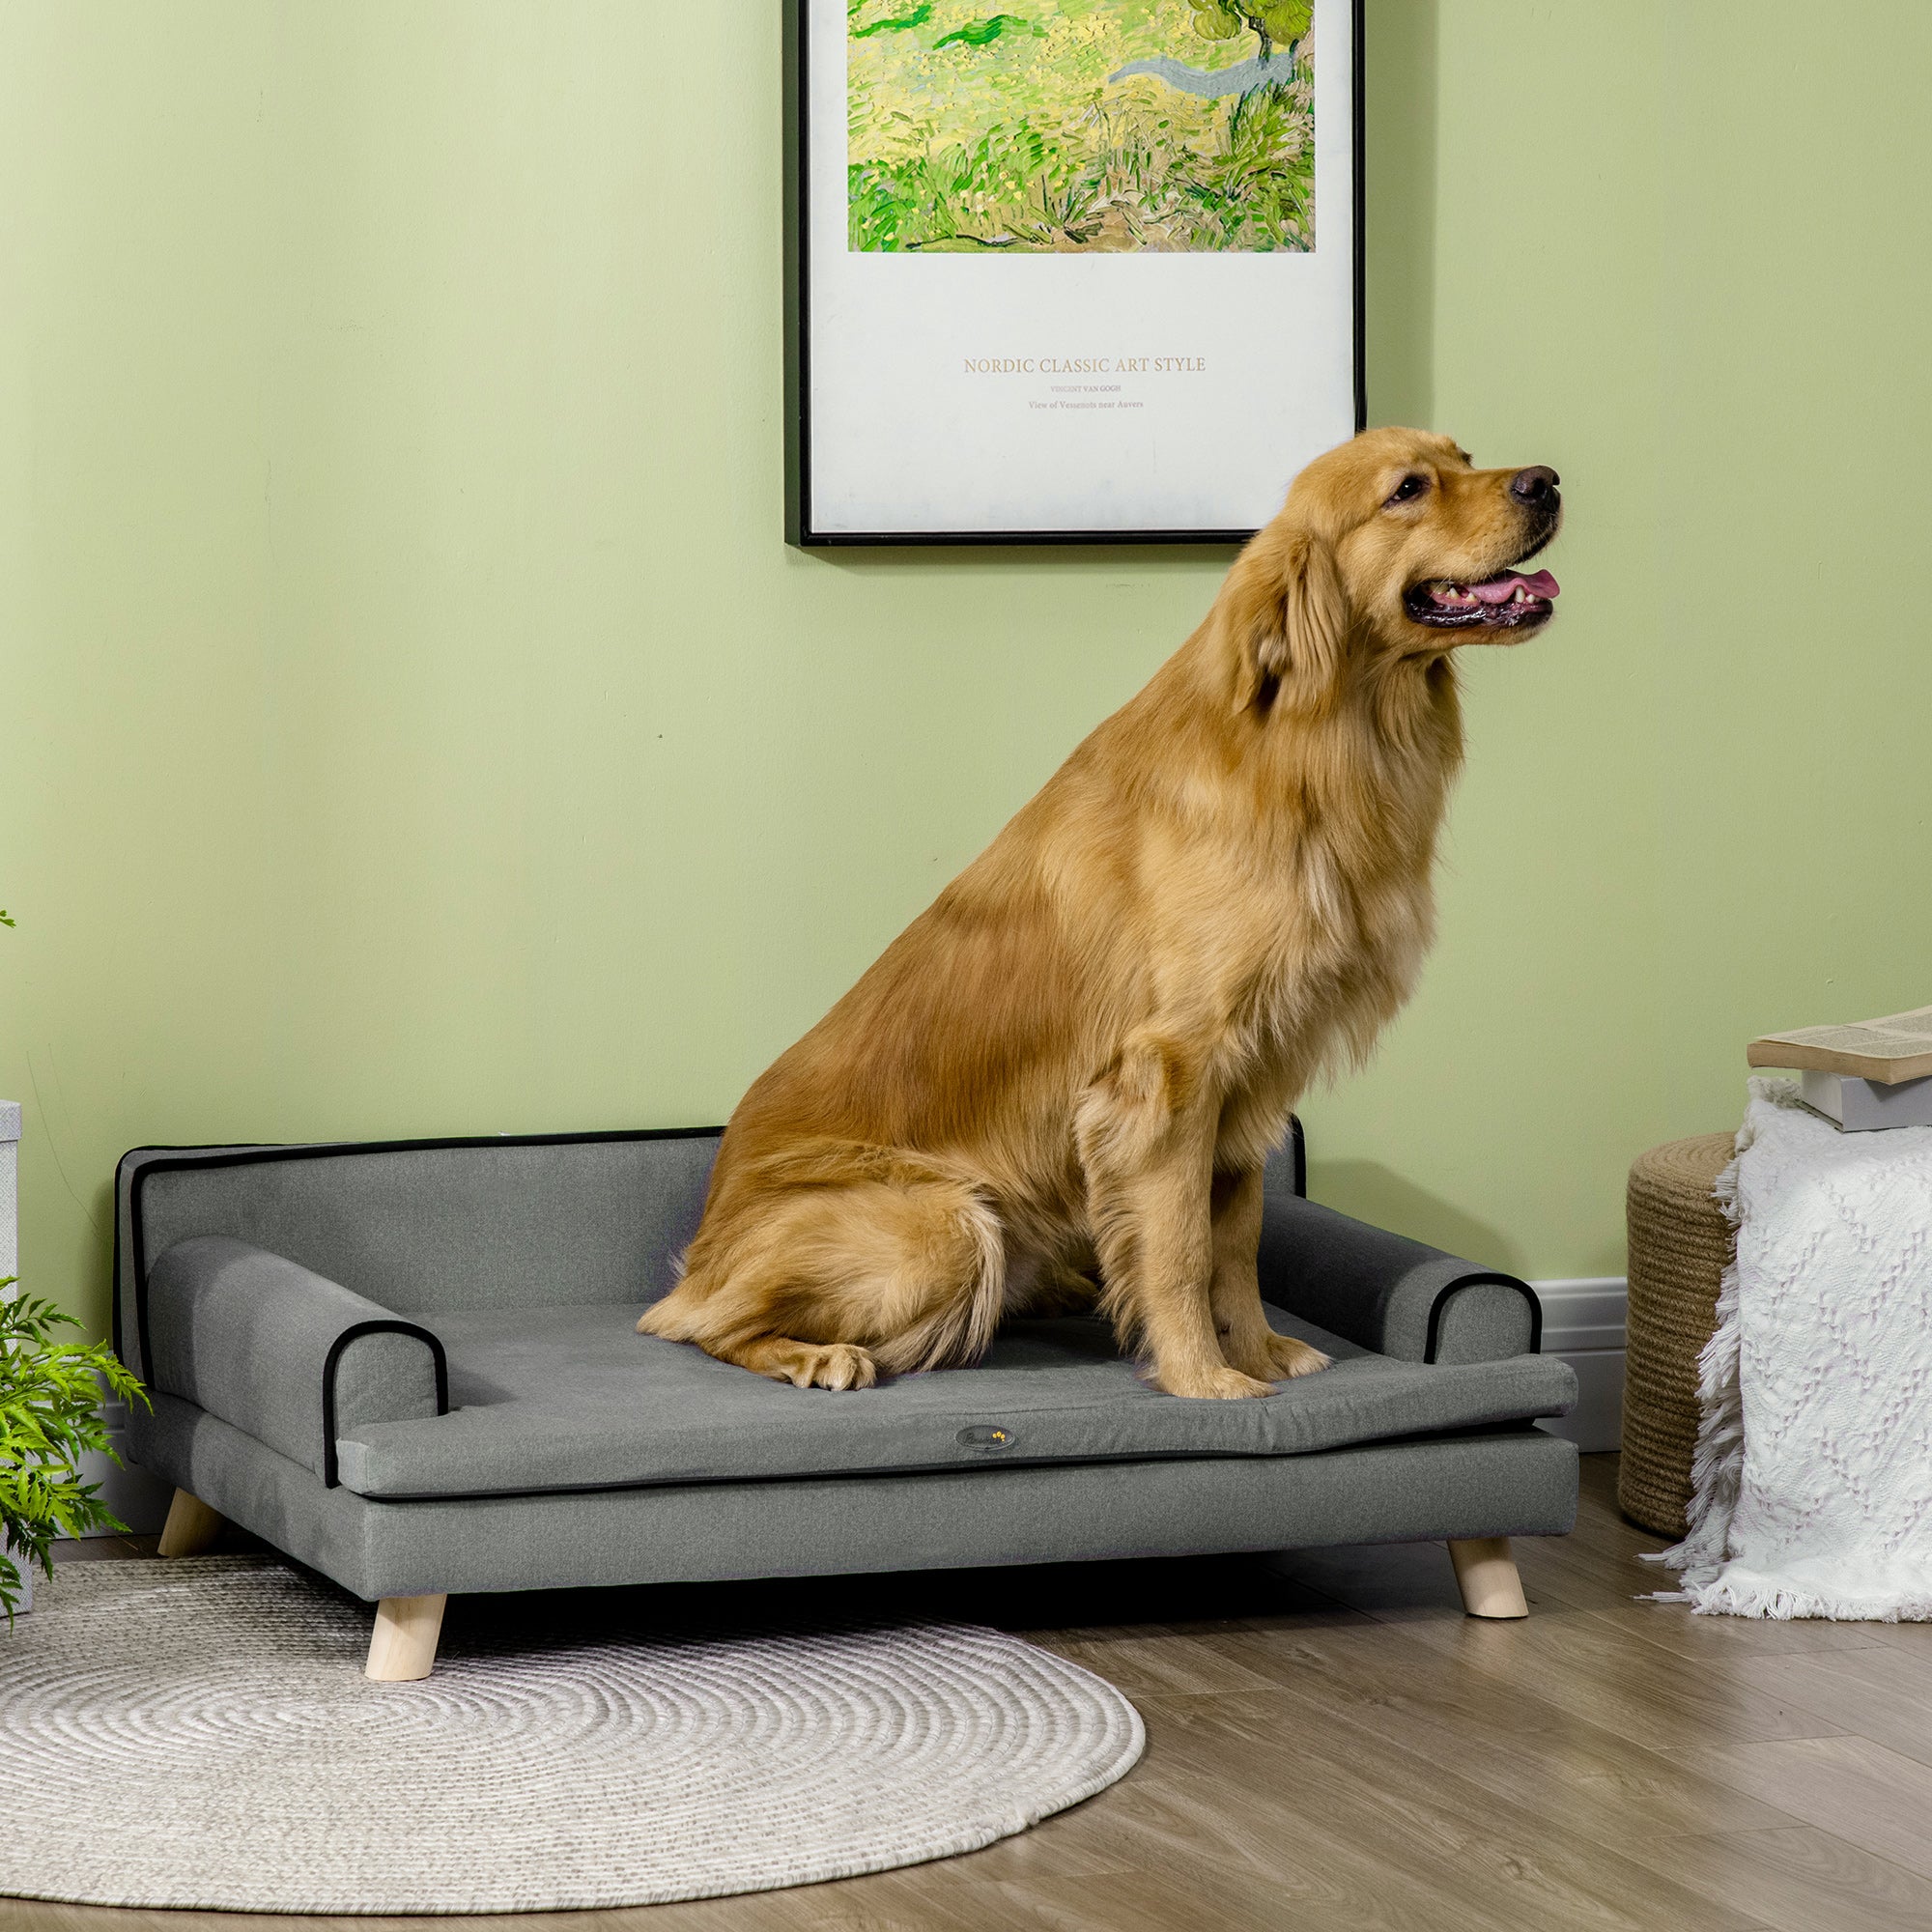 PawHut Dog Sofa with Legs Water-resistant Fabric Pet Chair Bed for Large Medium Dogs Grey 100 x 62 x 32 cm